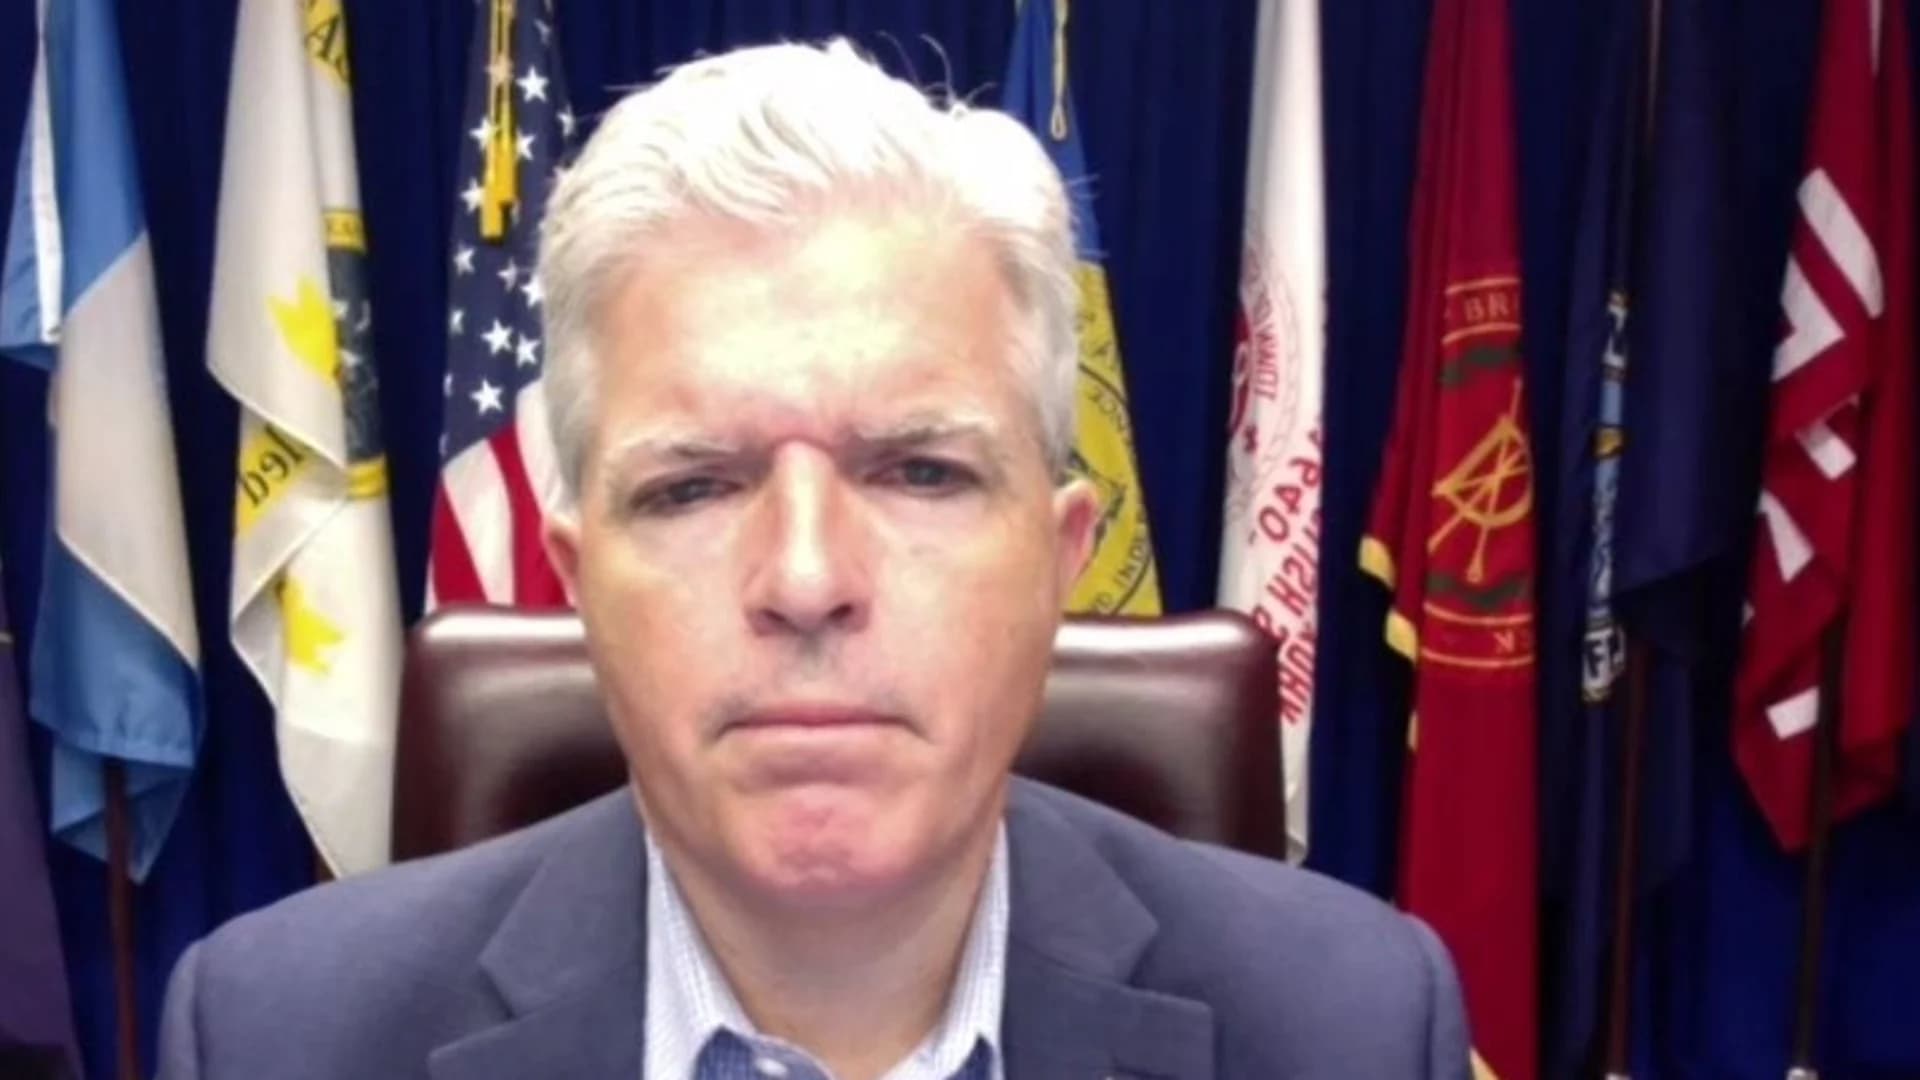 Bellone issues safety reminder as new Suffolk COVID-19 cases hit 'highest we have seen in some time'